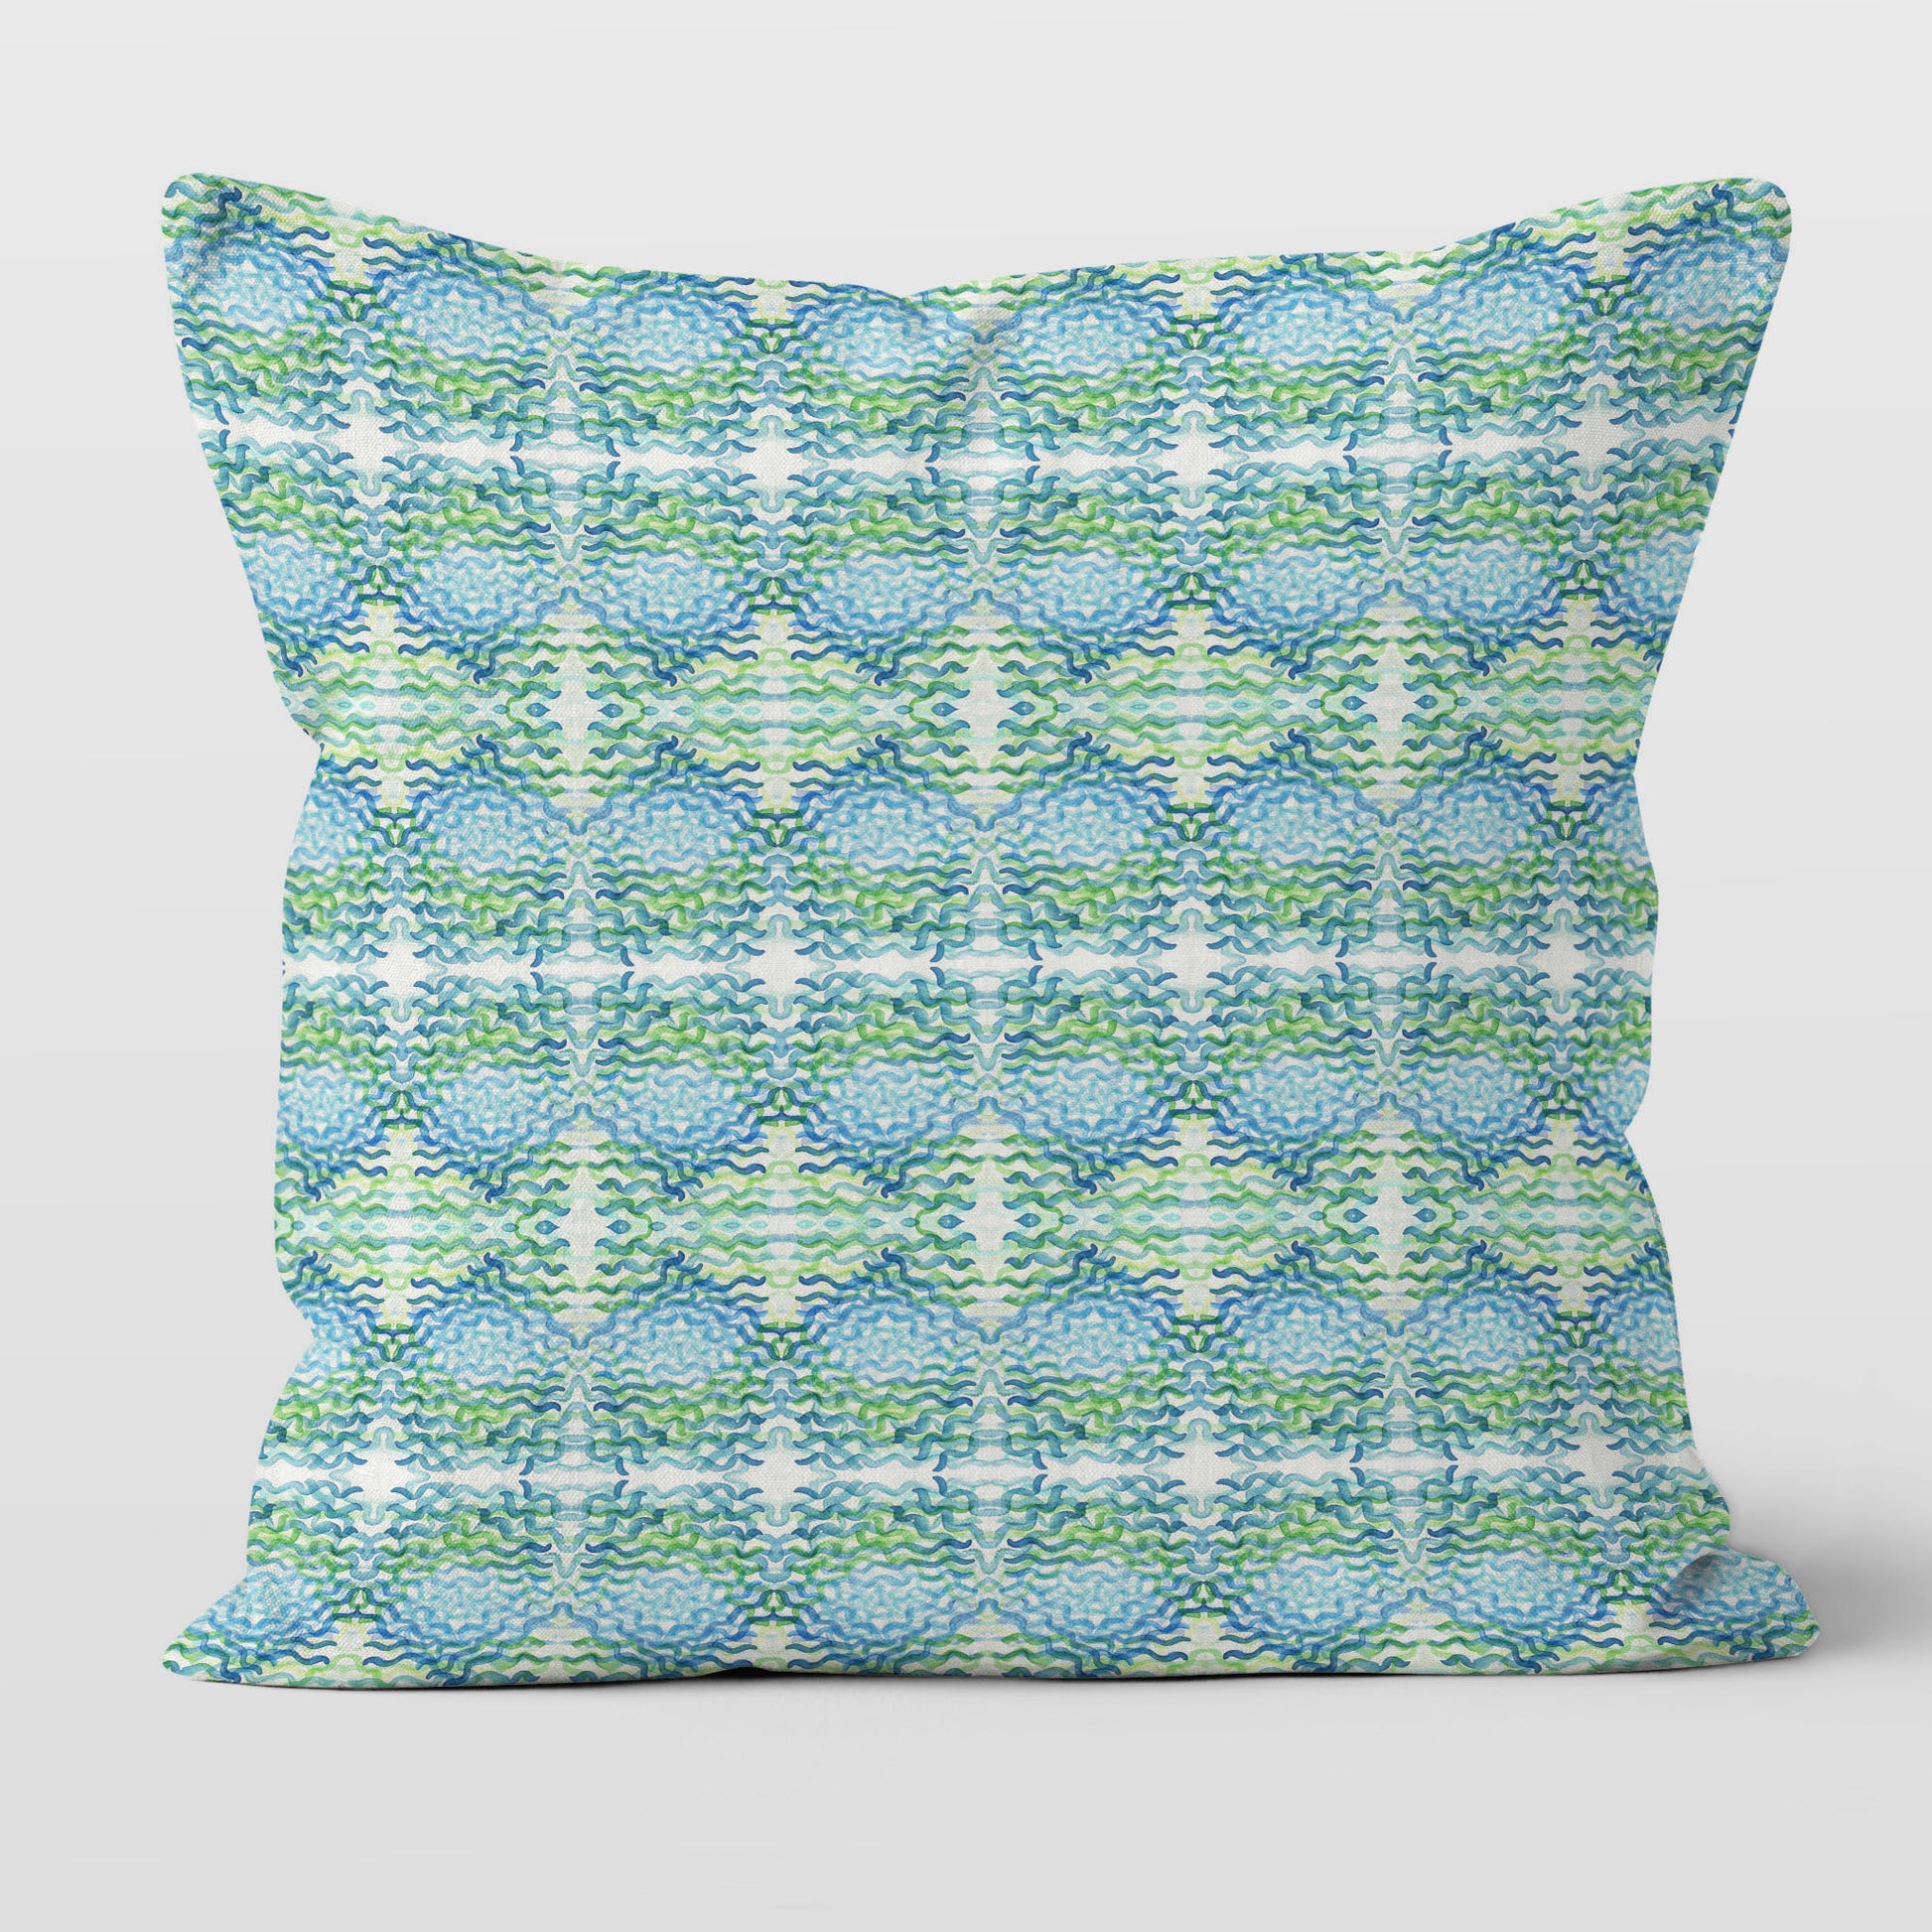 Throw pillow featuring a blue and green abstract, hand-painted watercolor pattern.